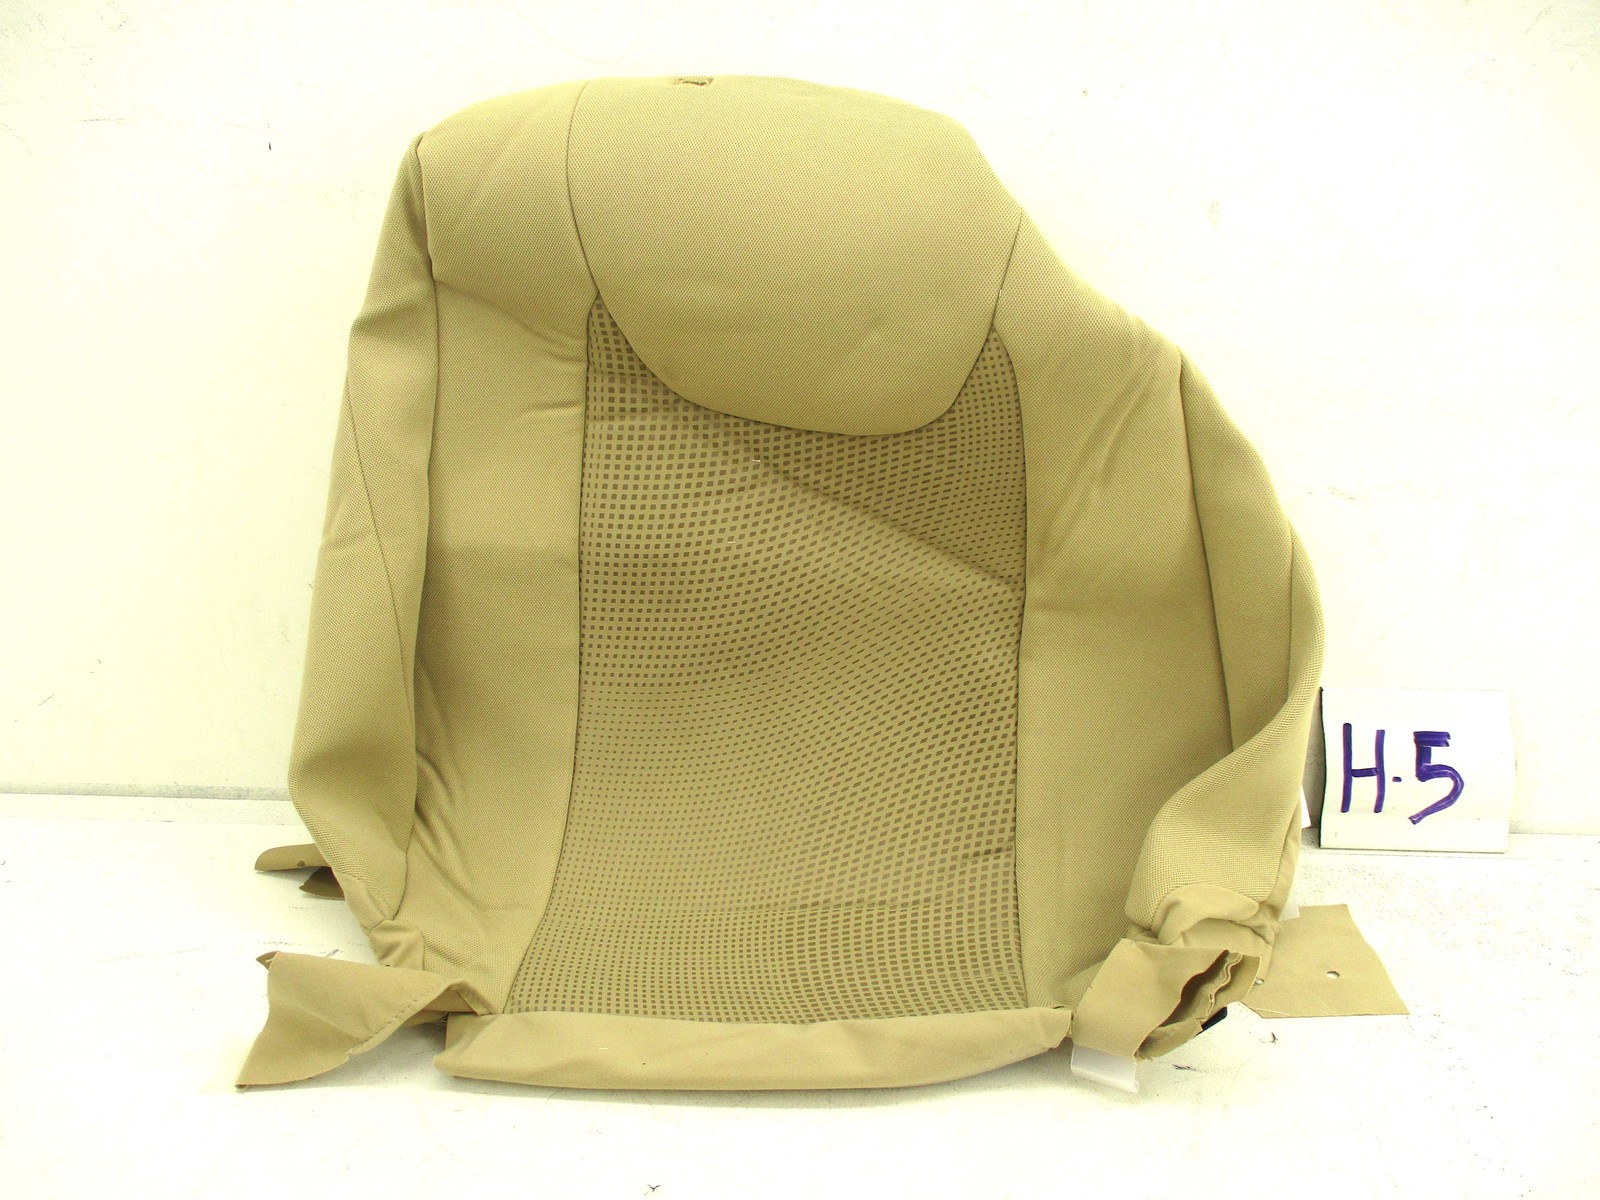 Primary image for New OEM Original Lexus CLOTH upper Seat Cover 2010-2012 RX350 RX450h LH tan